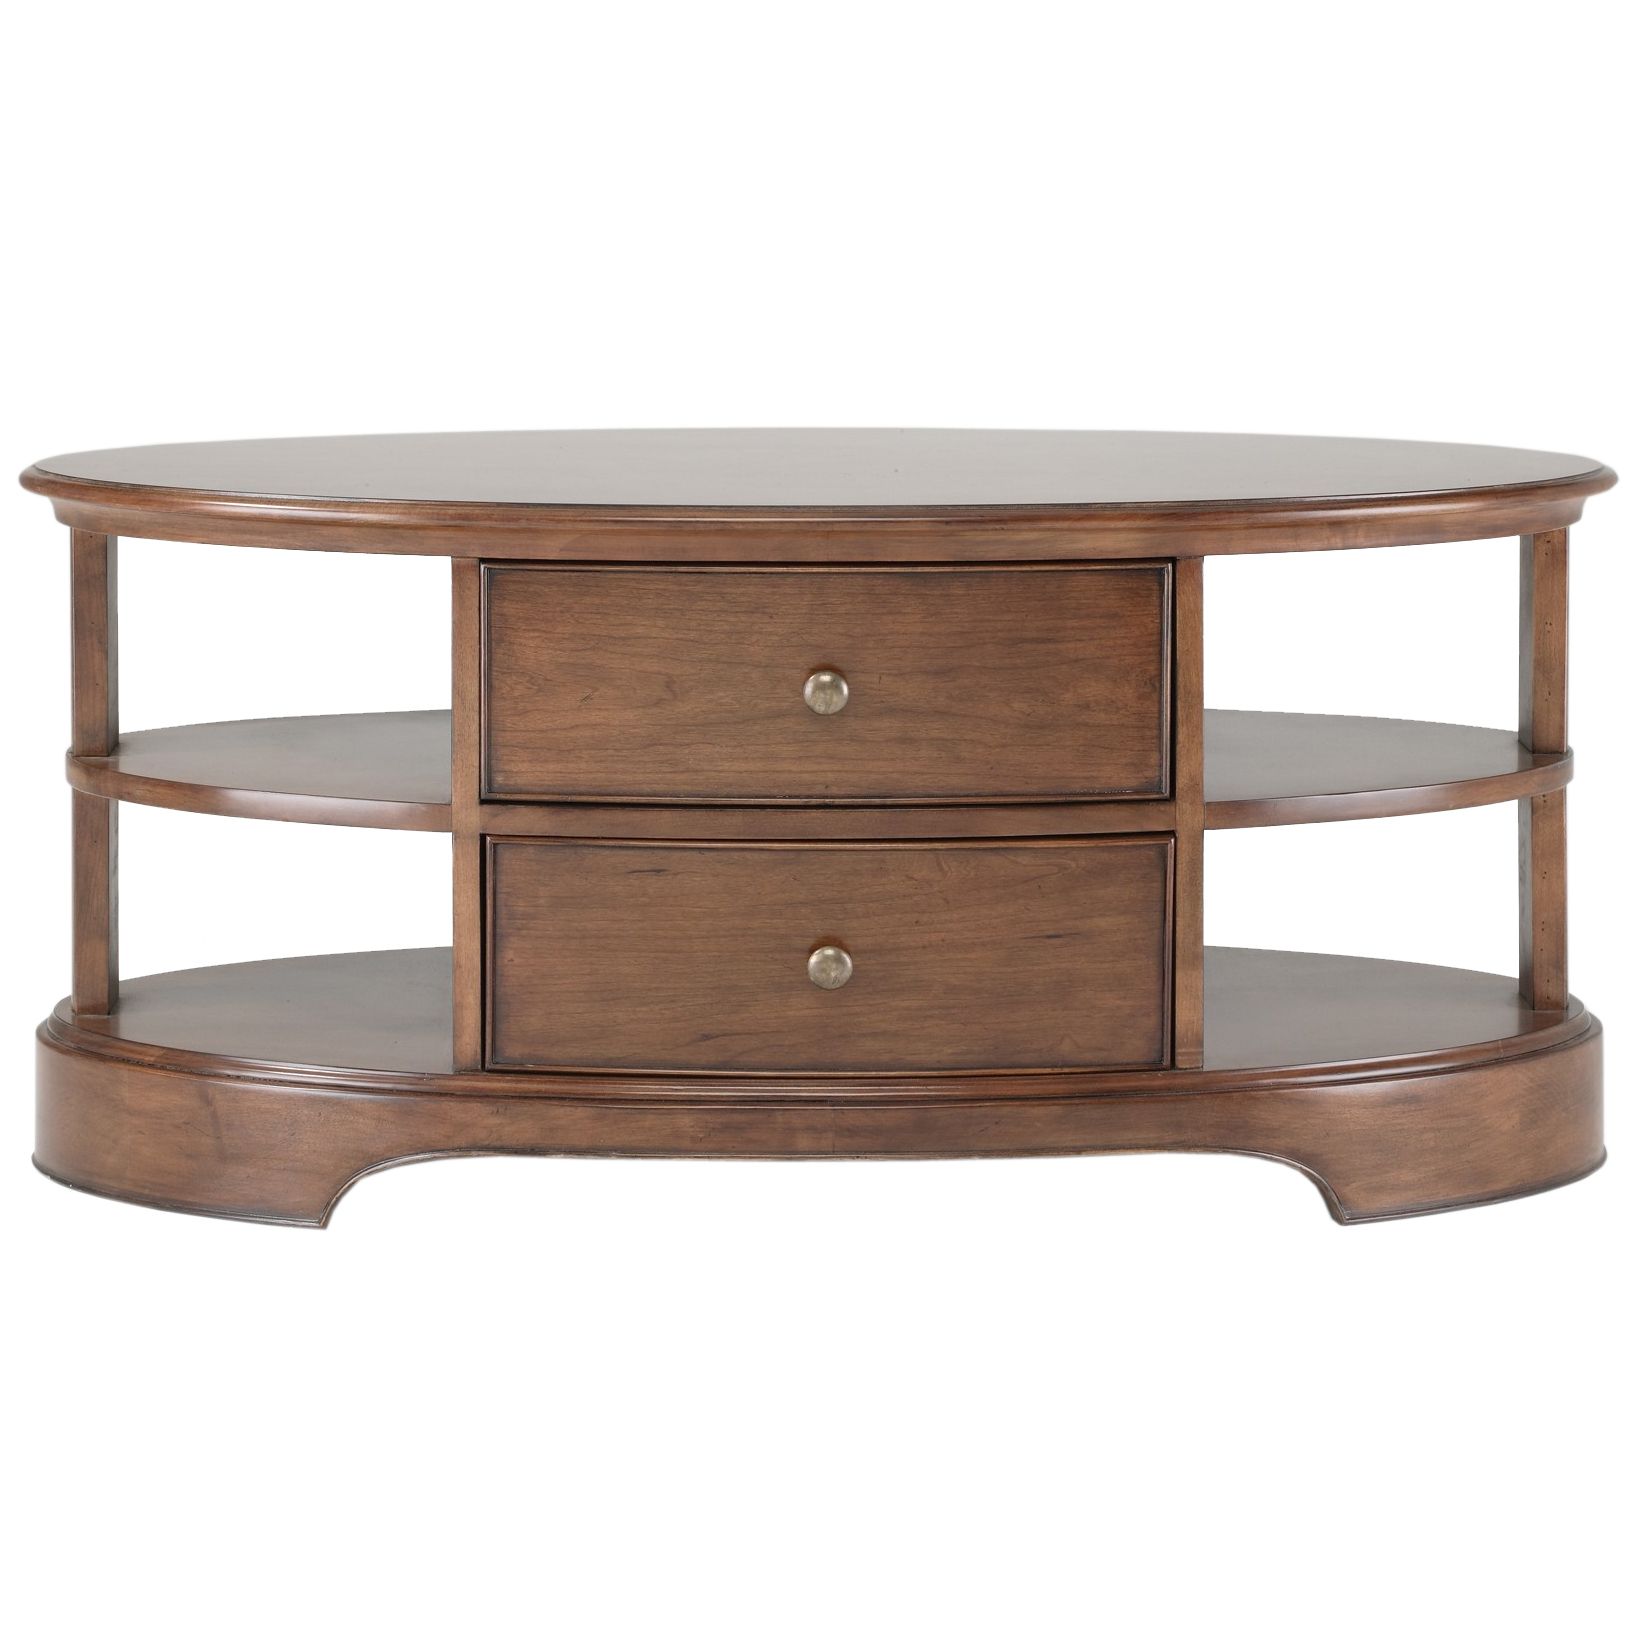 John Lewis Lille Oval Coffee Table